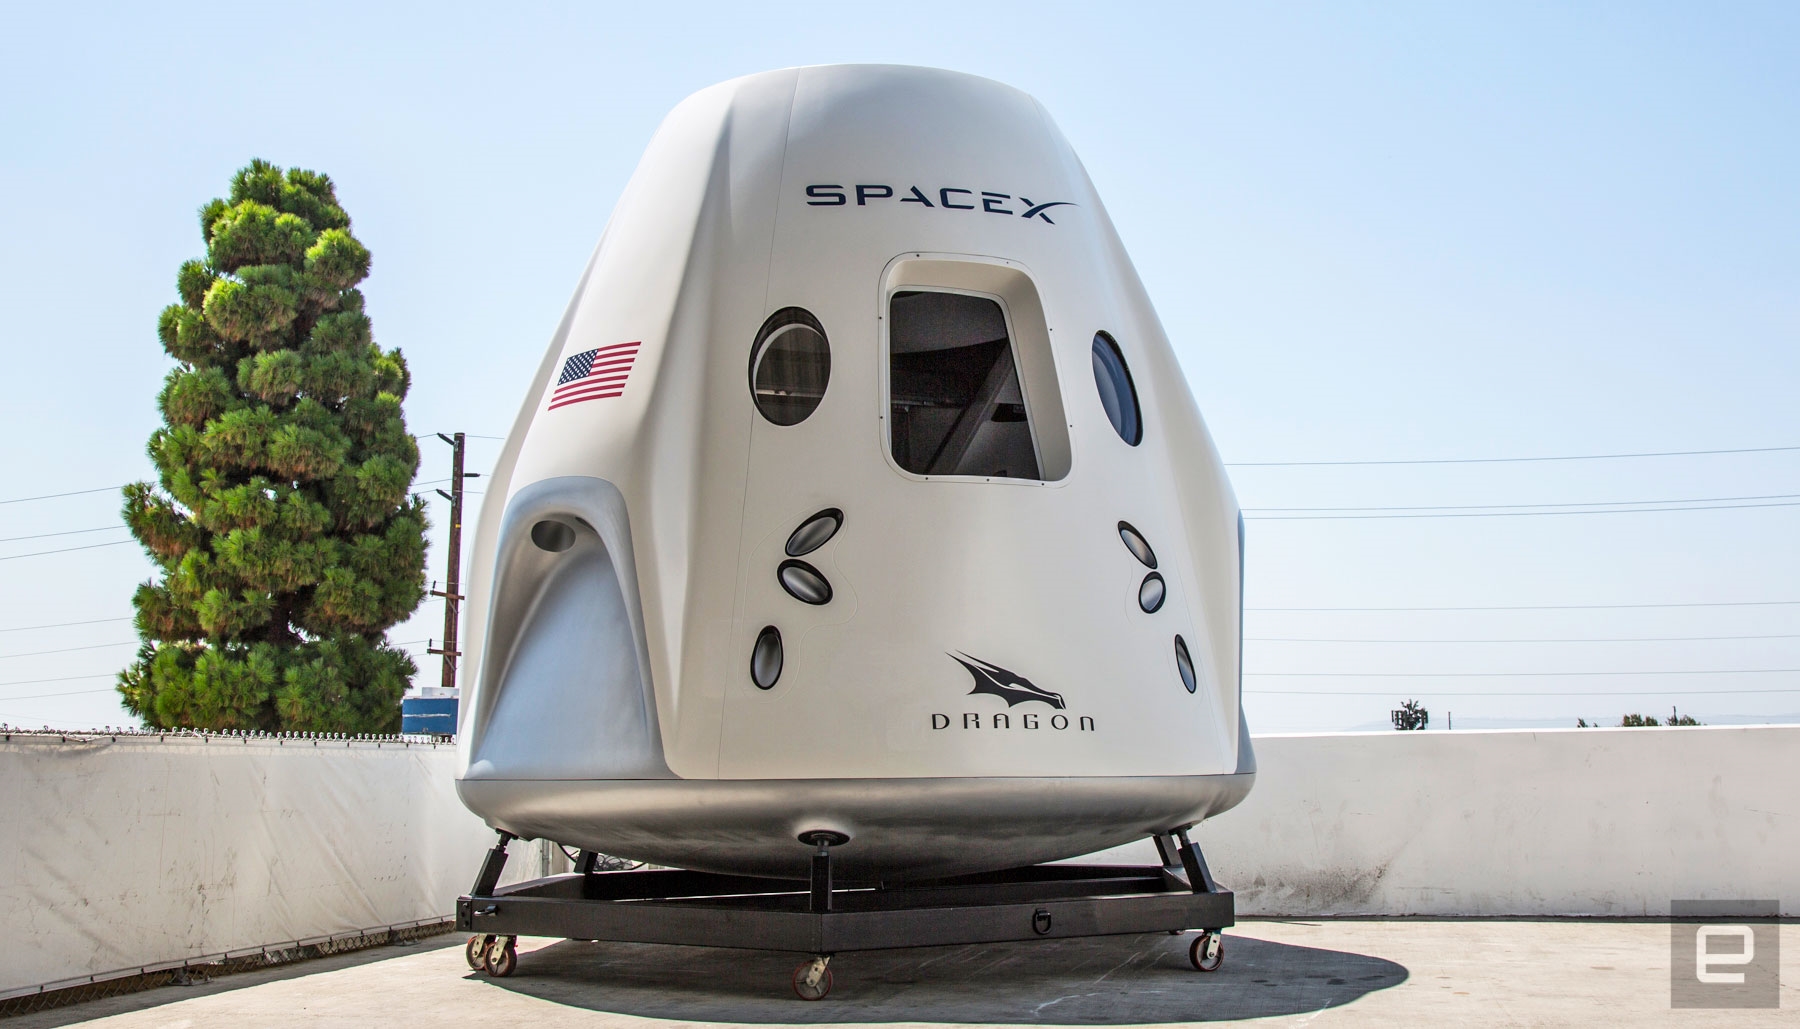 SpaceX readies its spacecraft and astronauts for crewed missions | DeviceDaily.com